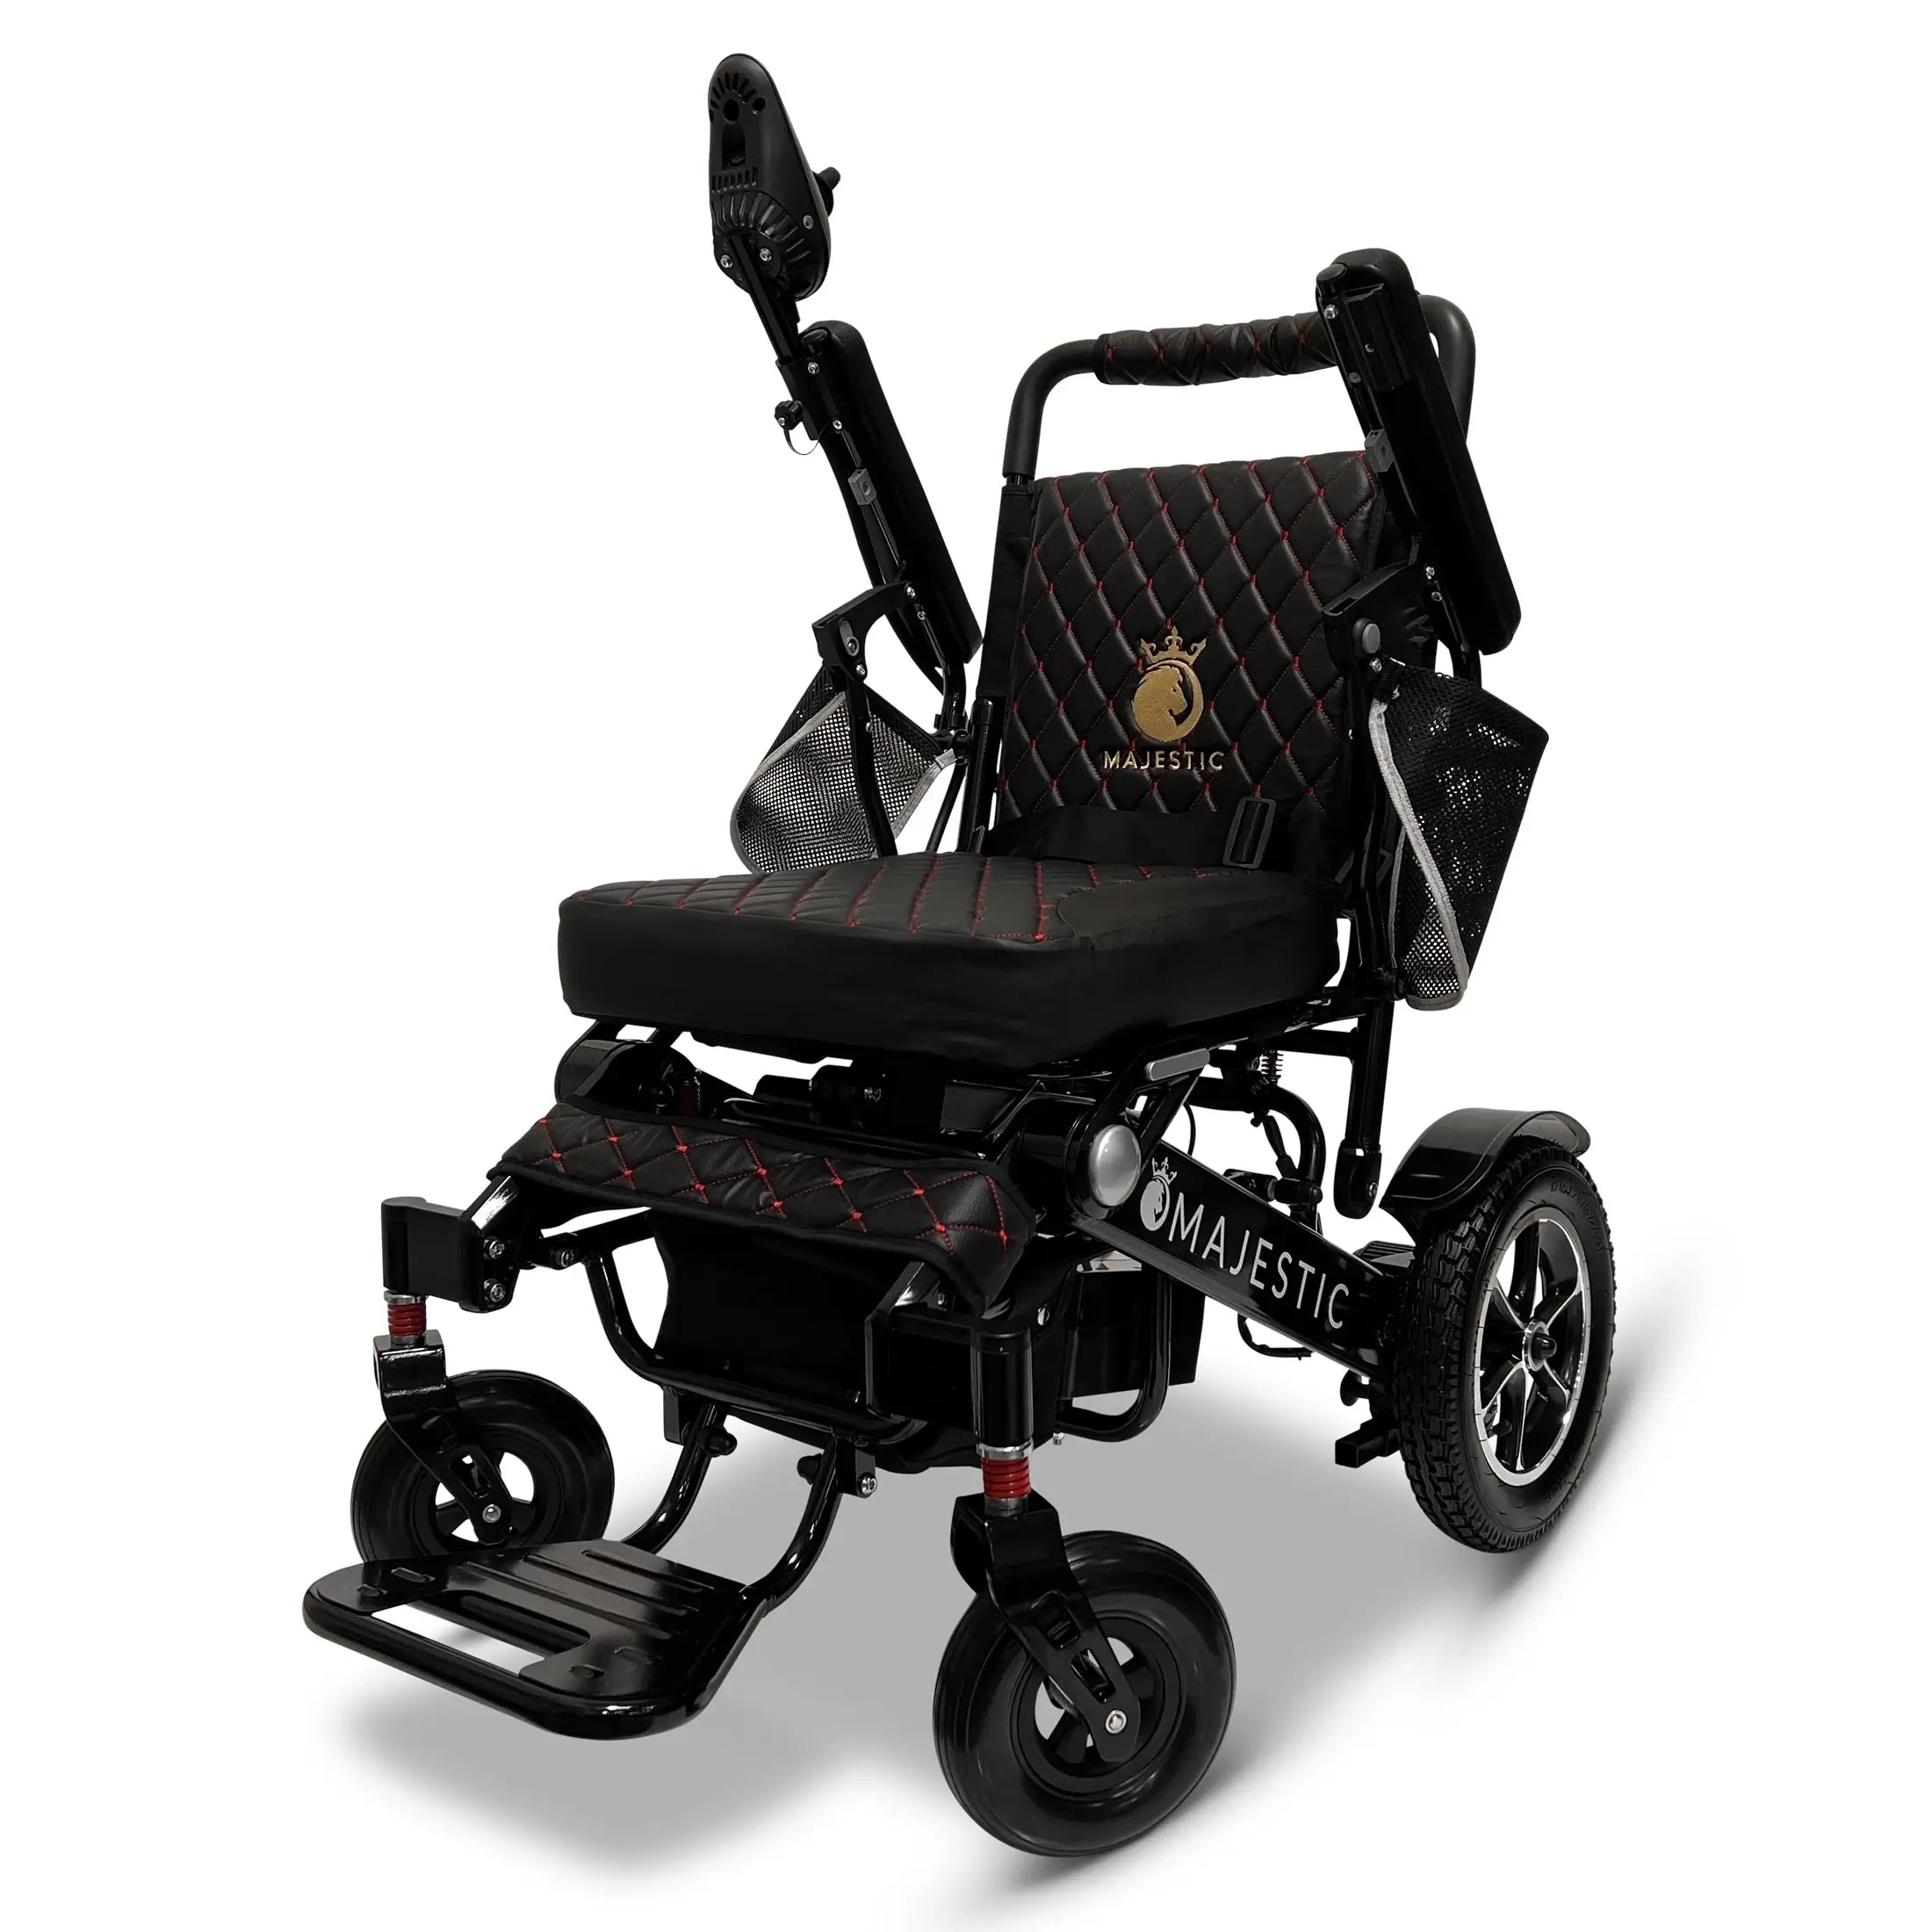 ComfyGo Majestic IQ-7000 AF Auto Folding Remote Controlled Electric Wheelchair Electric Wheelchair ComfyGo Black Black Up To 13 Miles - 12AH Battery